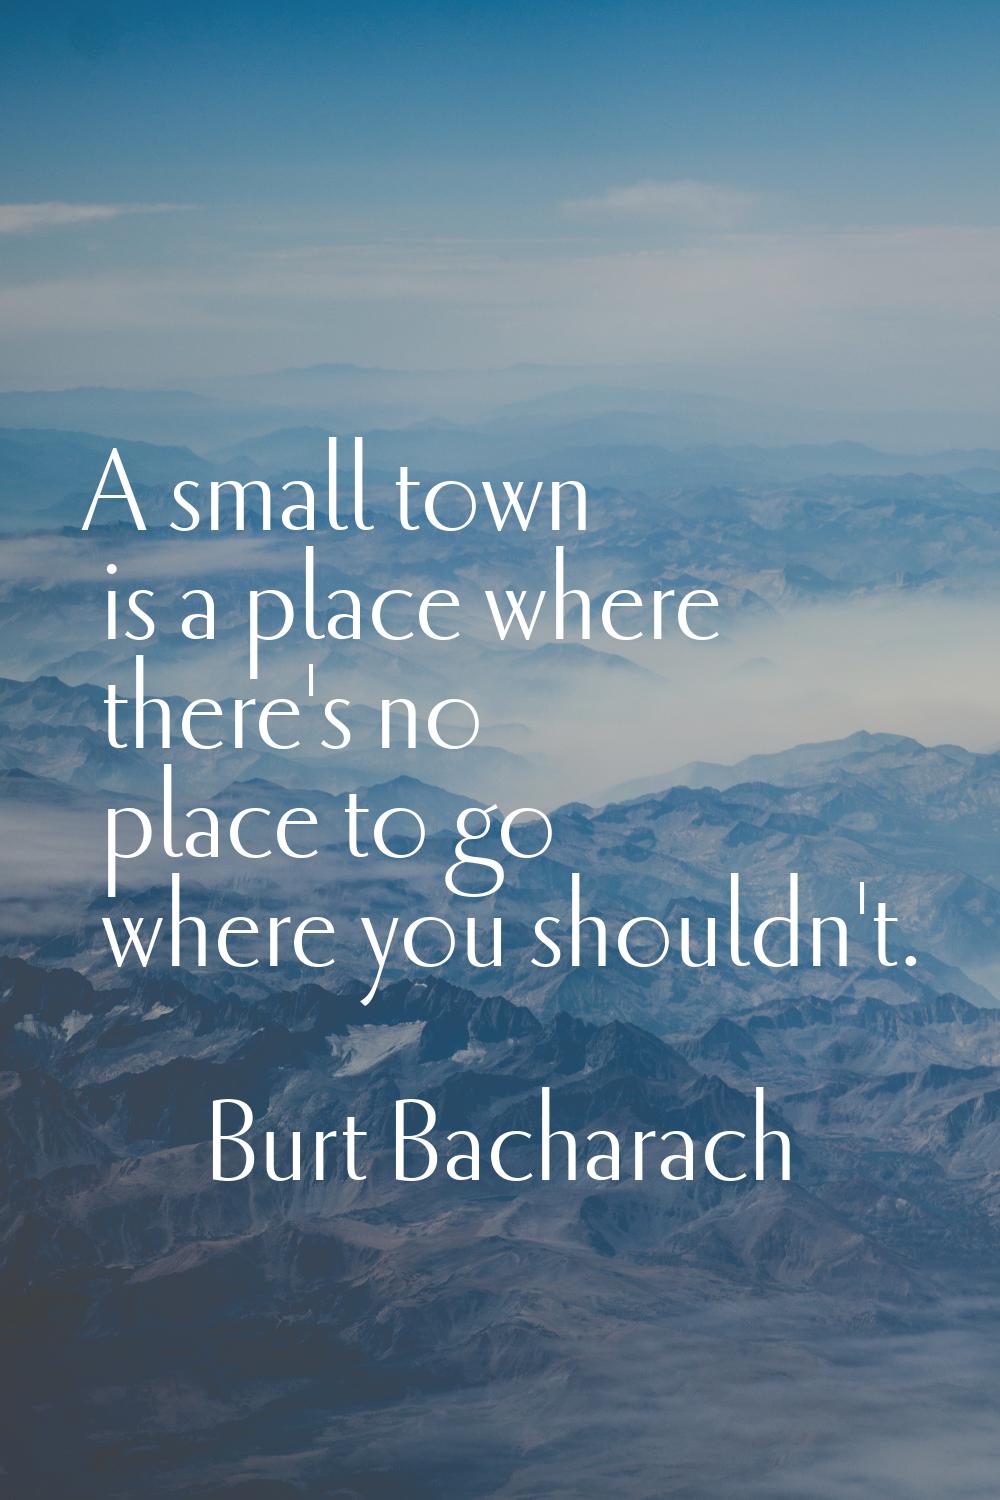 A small town is a place where there's no place to go where you shouldn't.